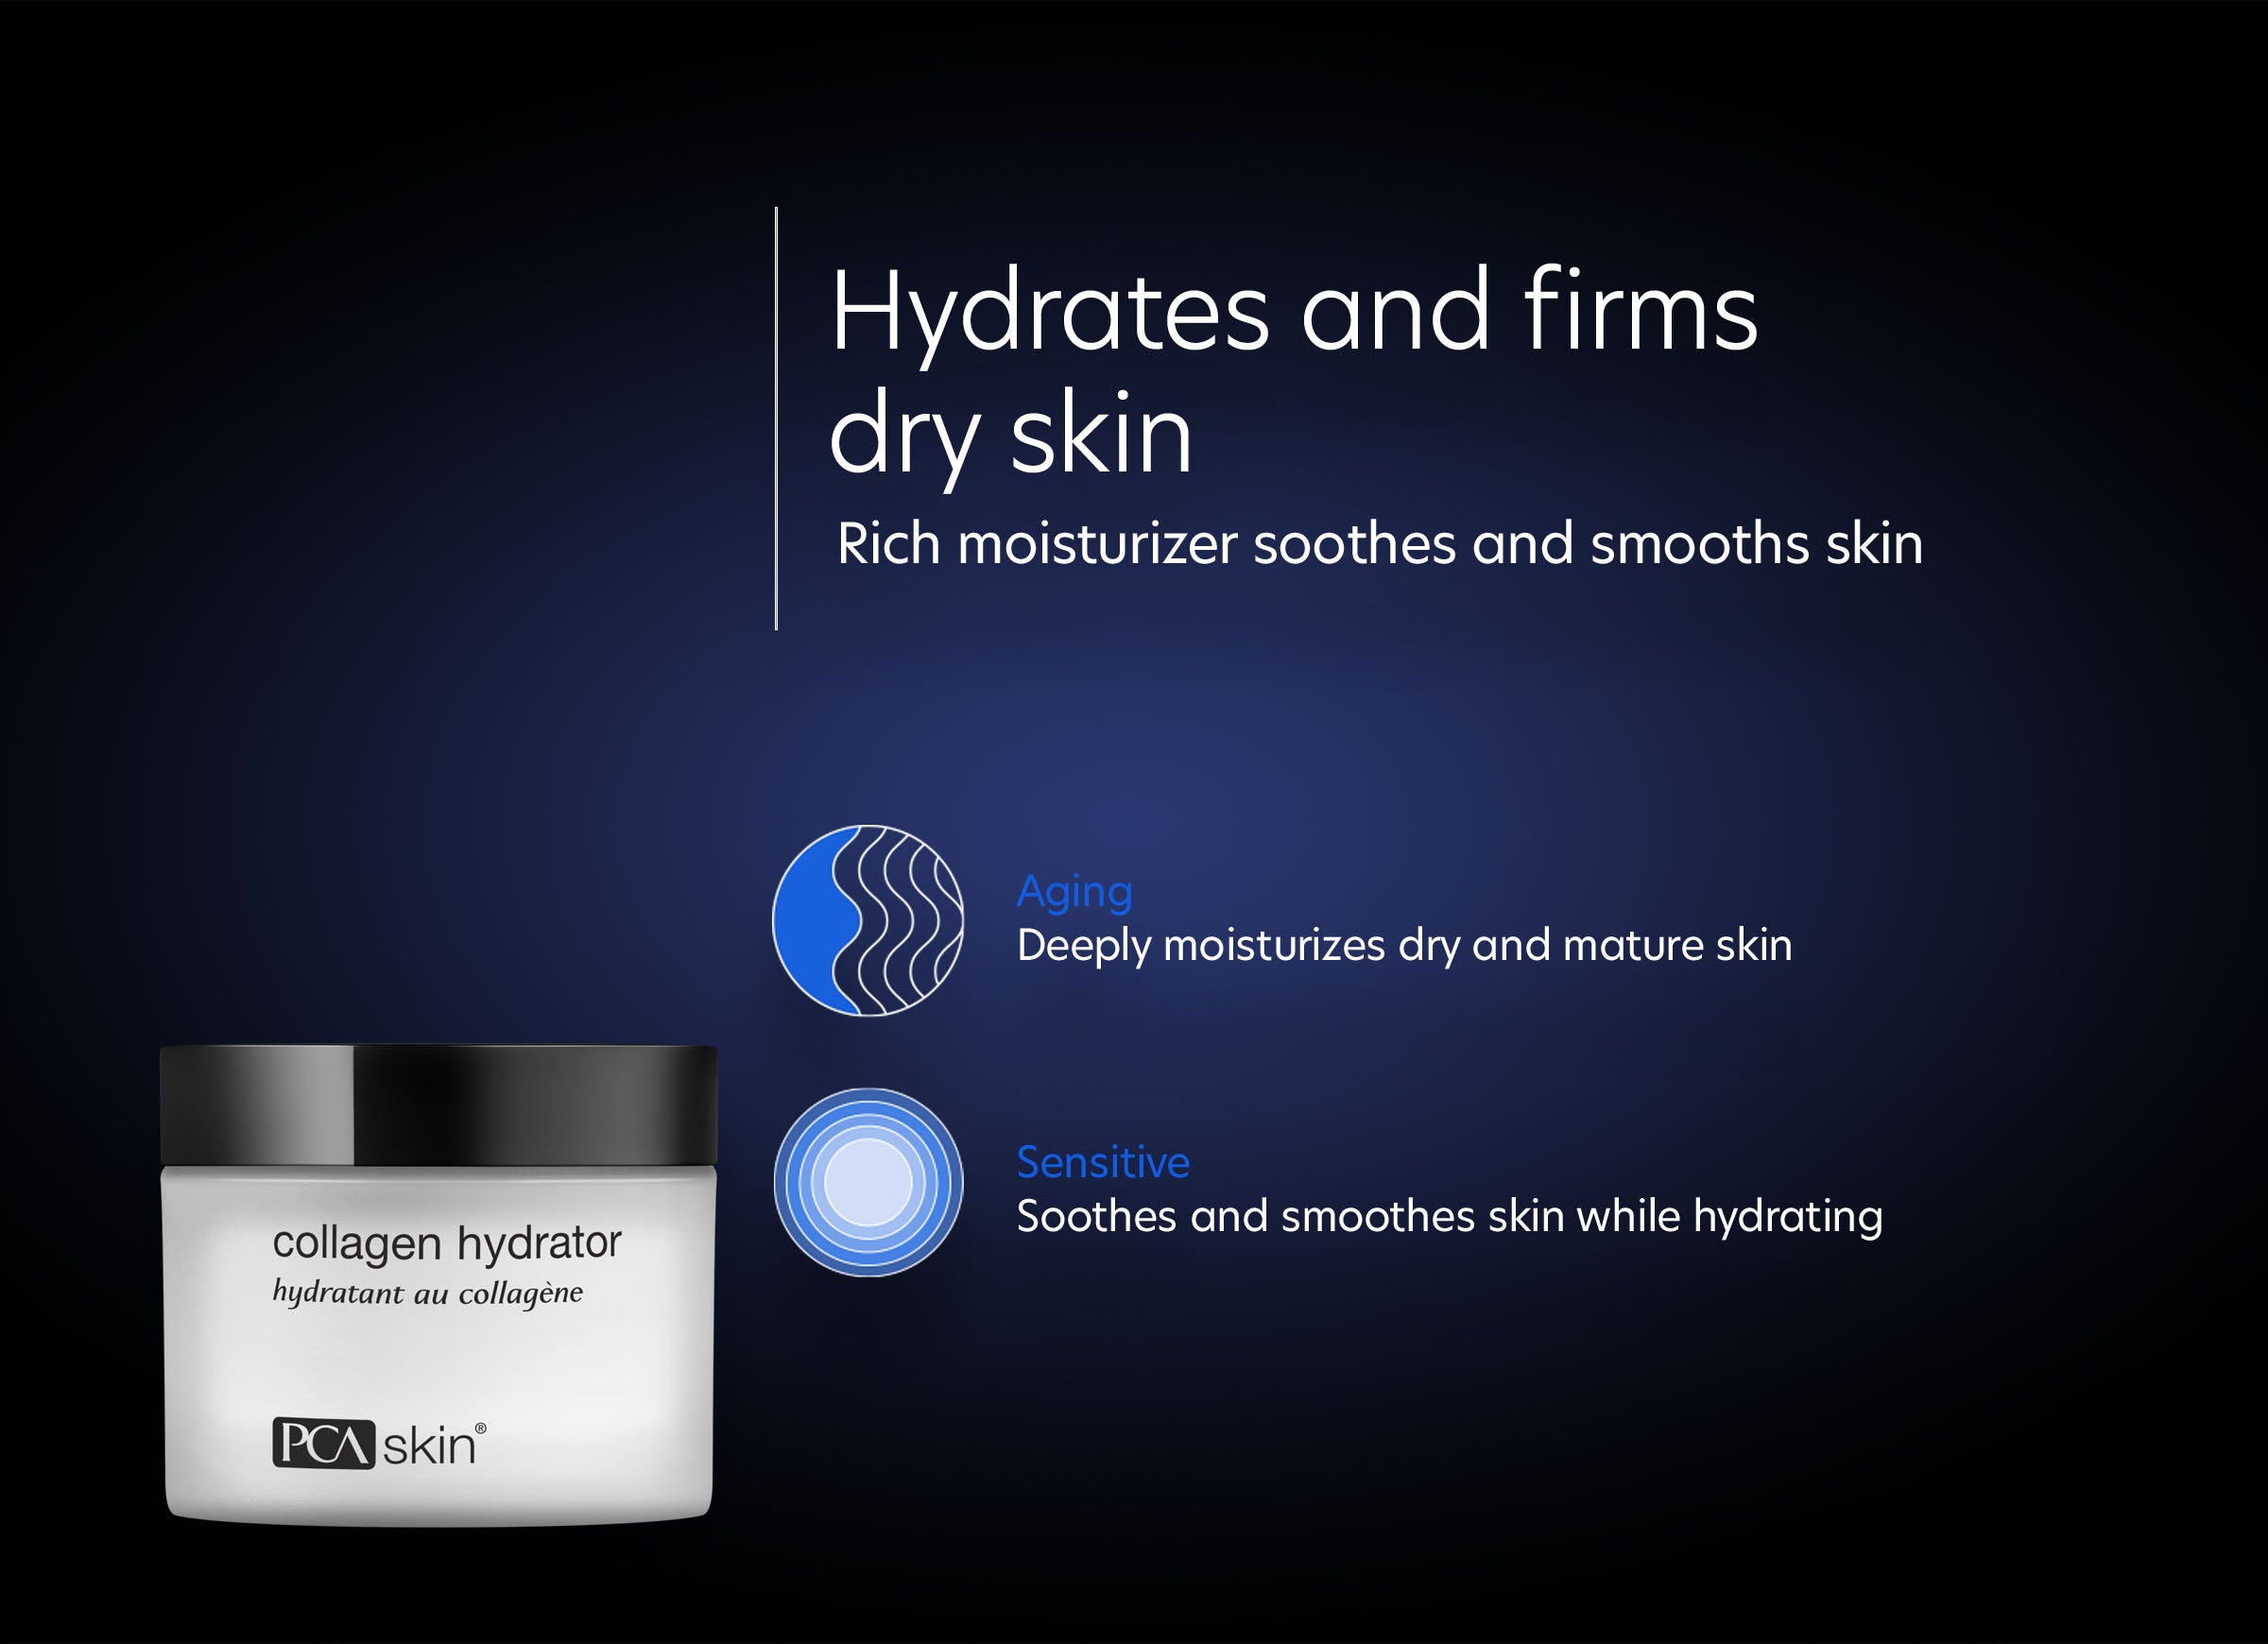 Collagen Hydrator - Hydrates and firms dry skin. Rich Moisturizer soothes and smooths skin